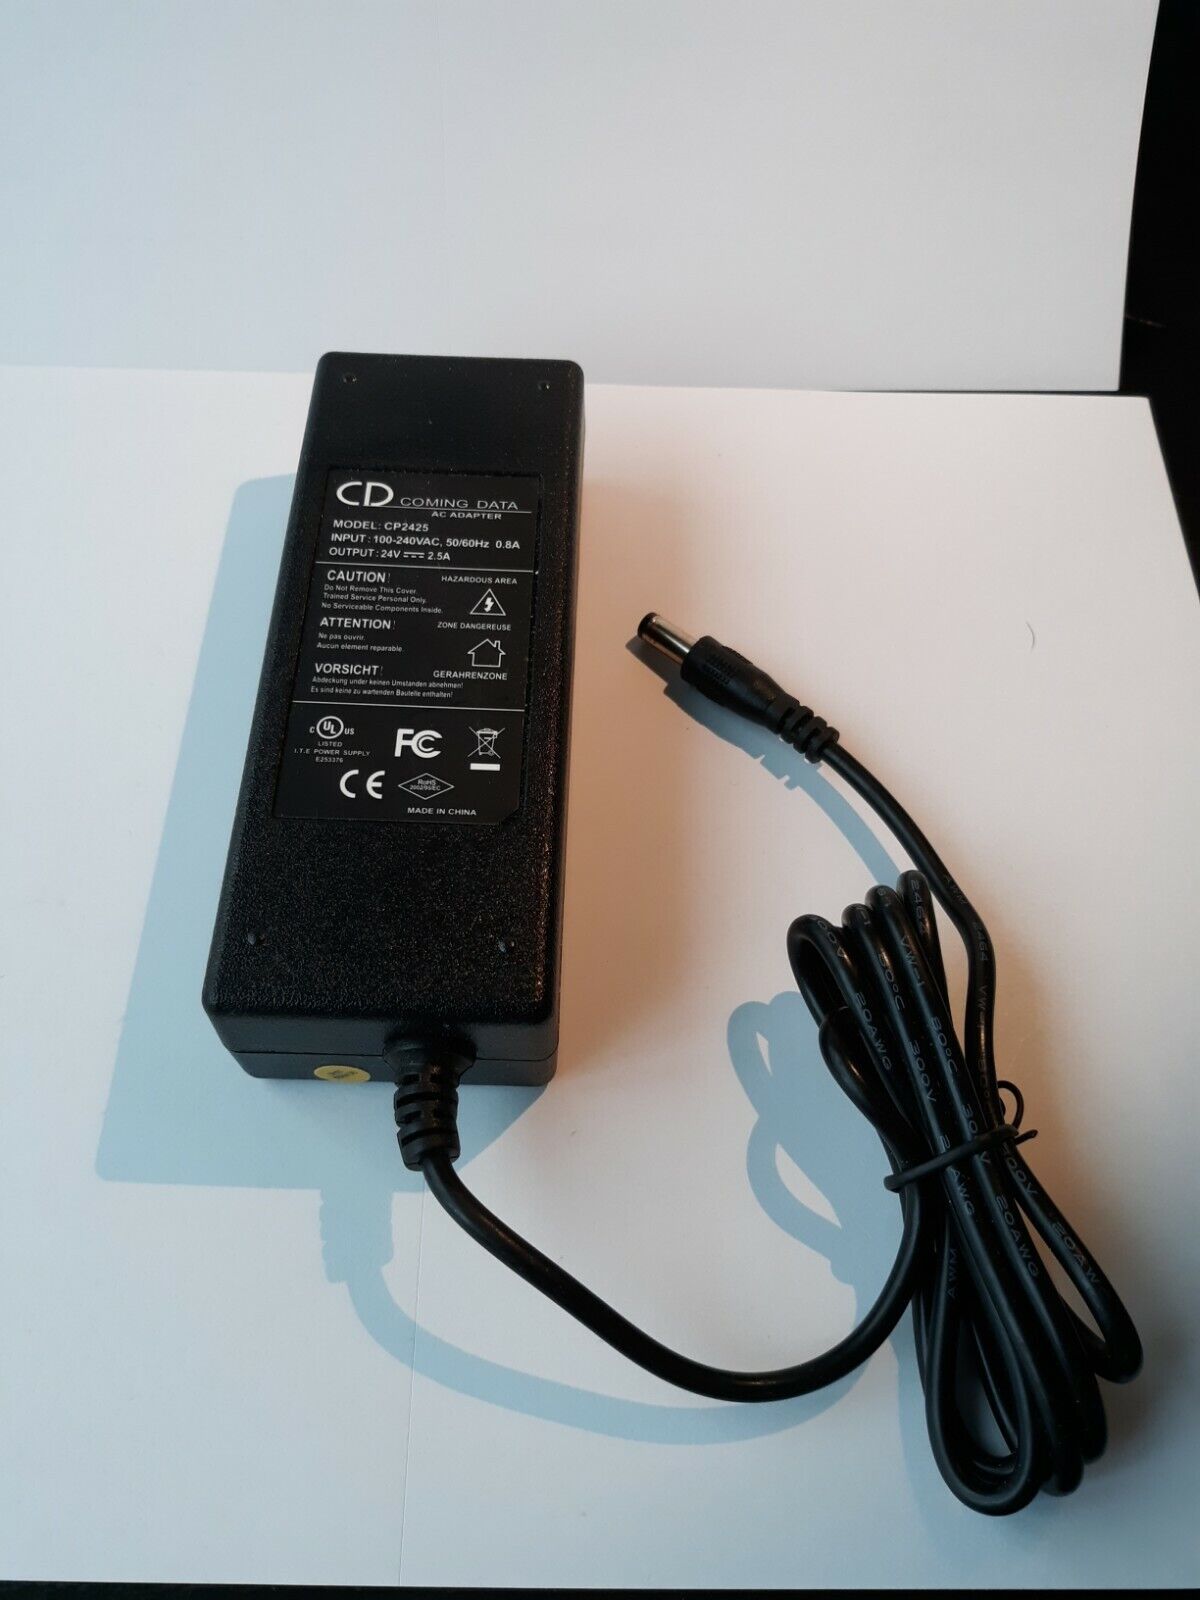 AC Adapter CD Coming Data, model:CP2425 24VDC, 2.5A Brand: Coming Data Type: AC/DC Adapter Color: Black Compatible - Click Image to Close